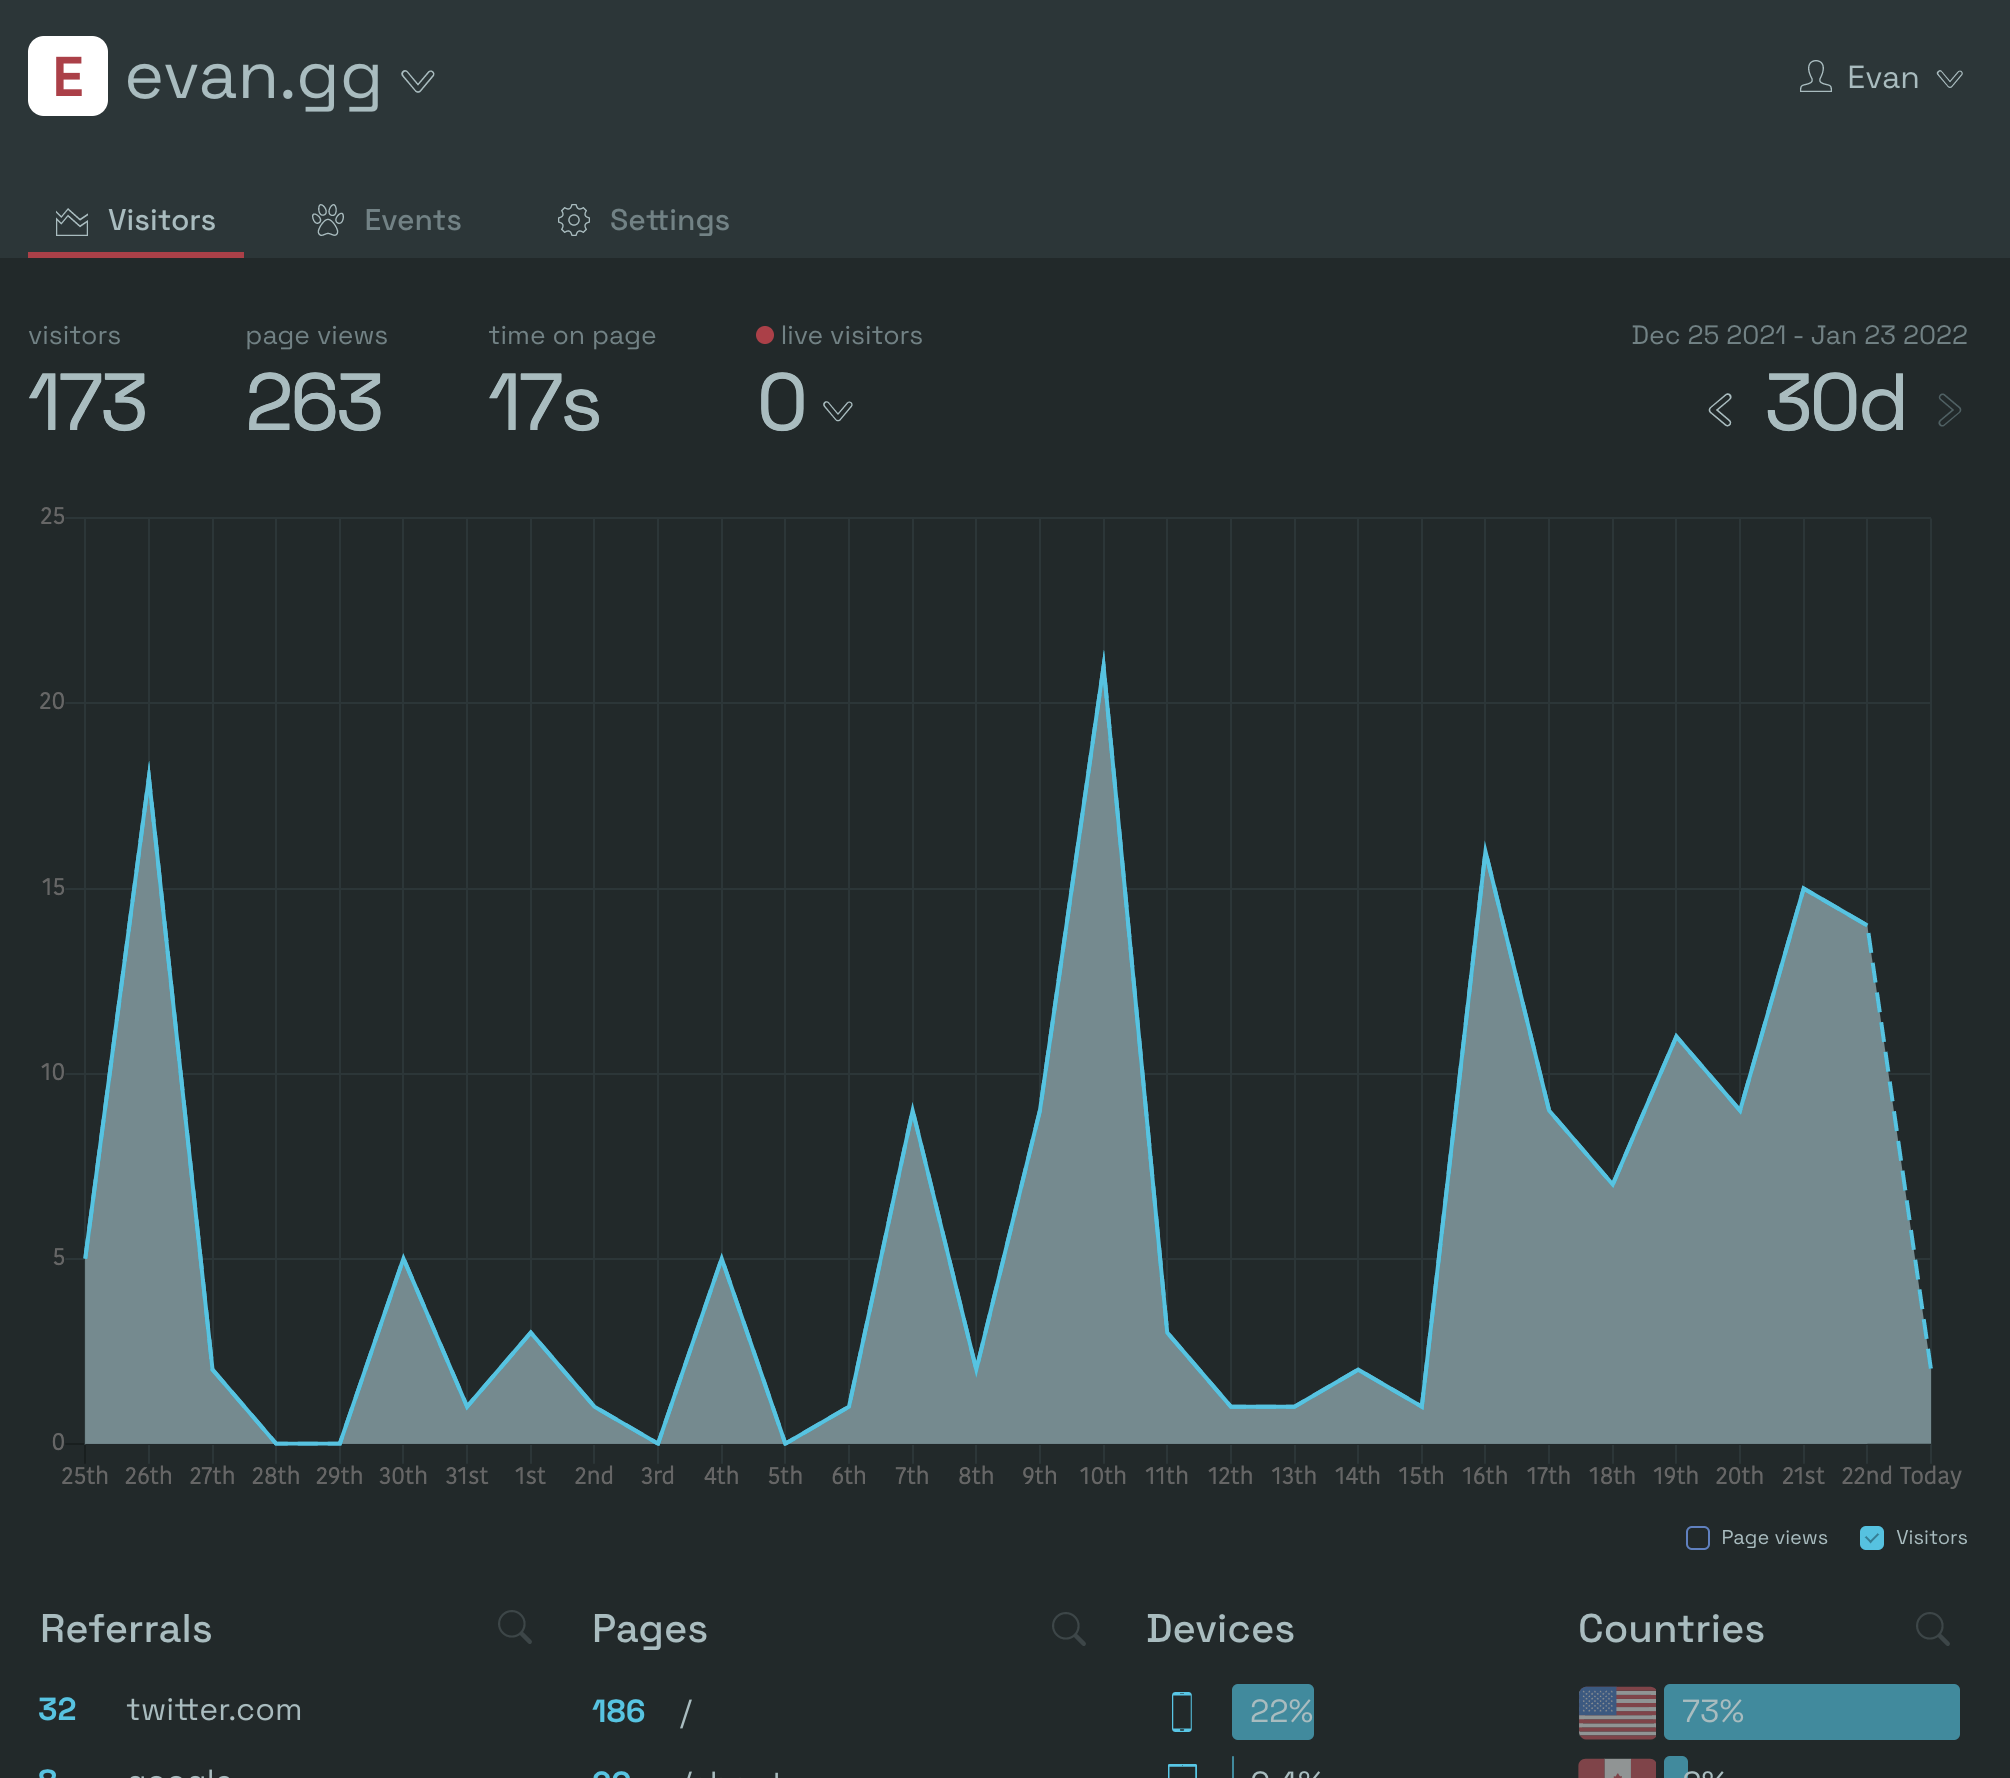 A screenshot of some data from the dashboard